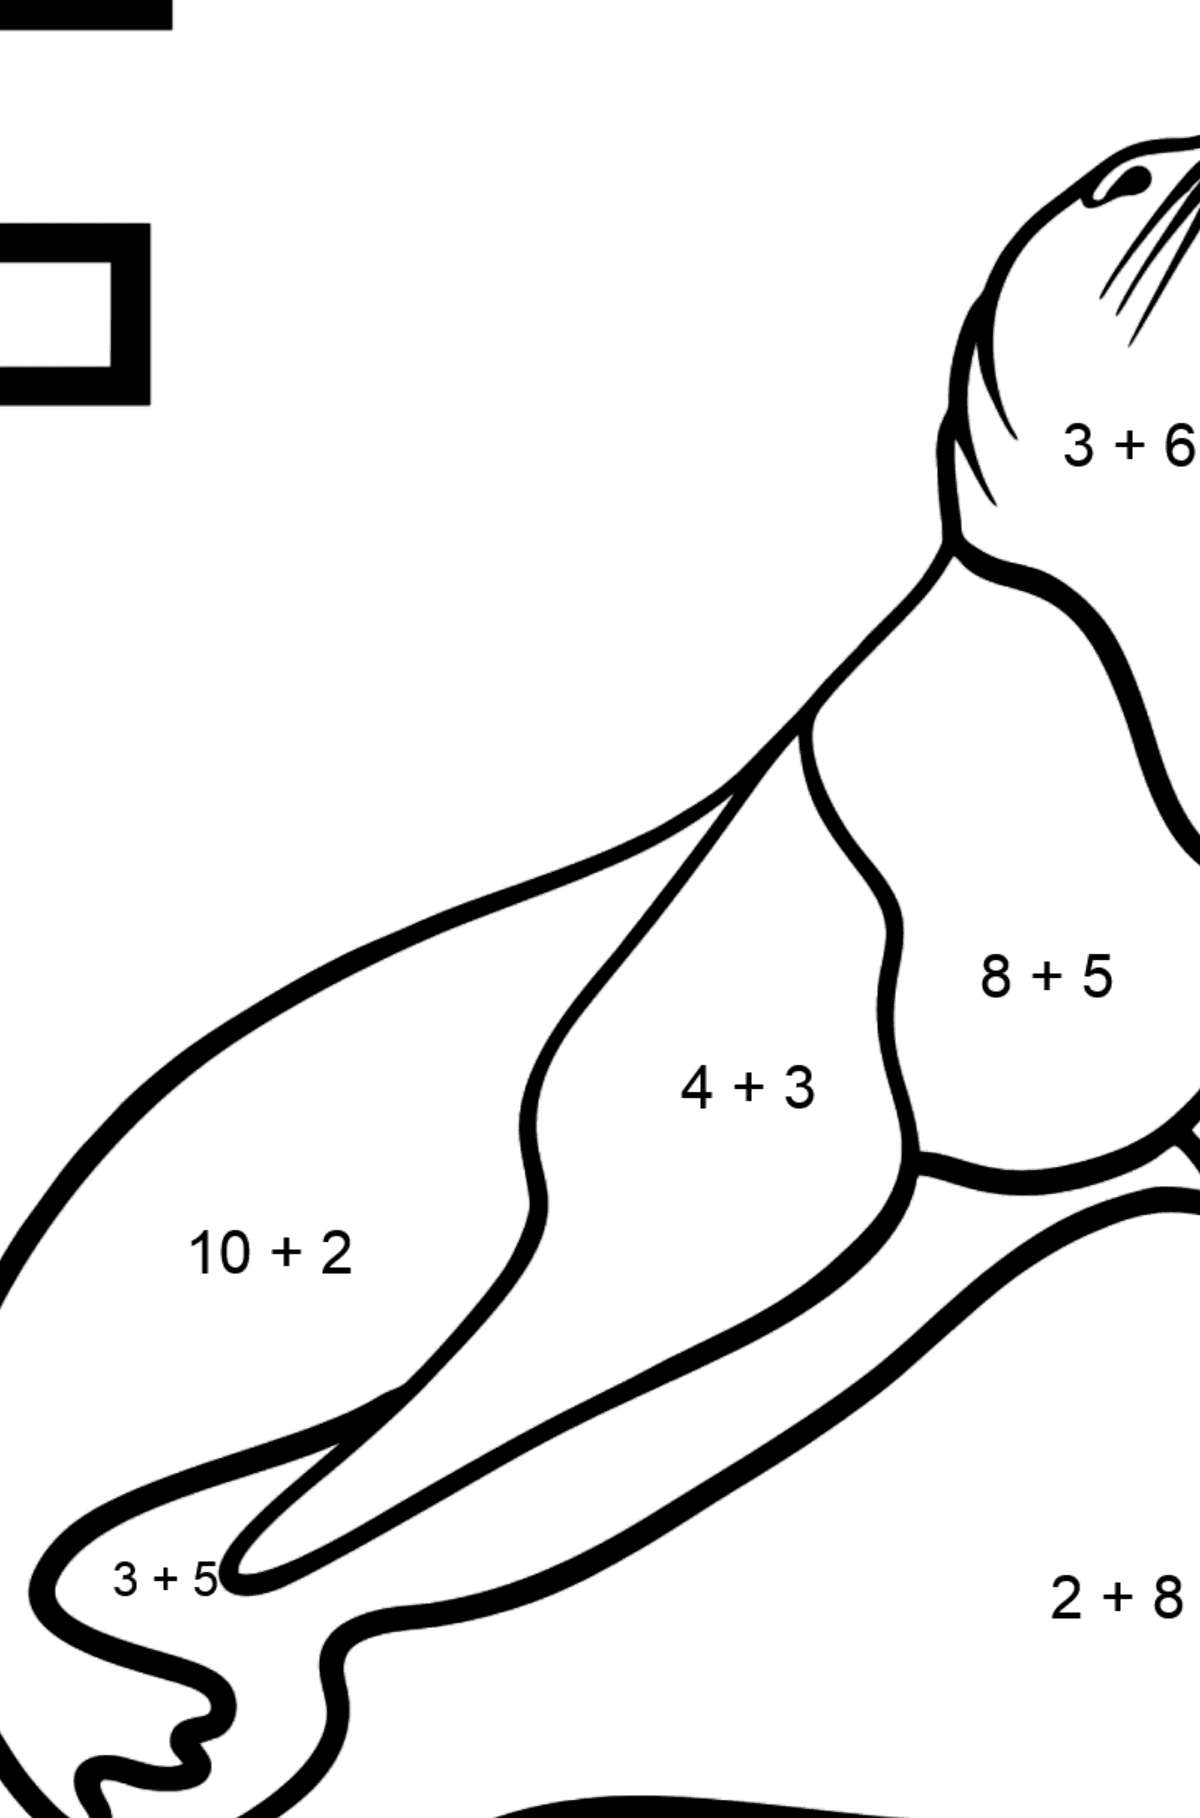 Portuguese Letter F coloring pages - FOCA - Math Coloring - Addition for Kids